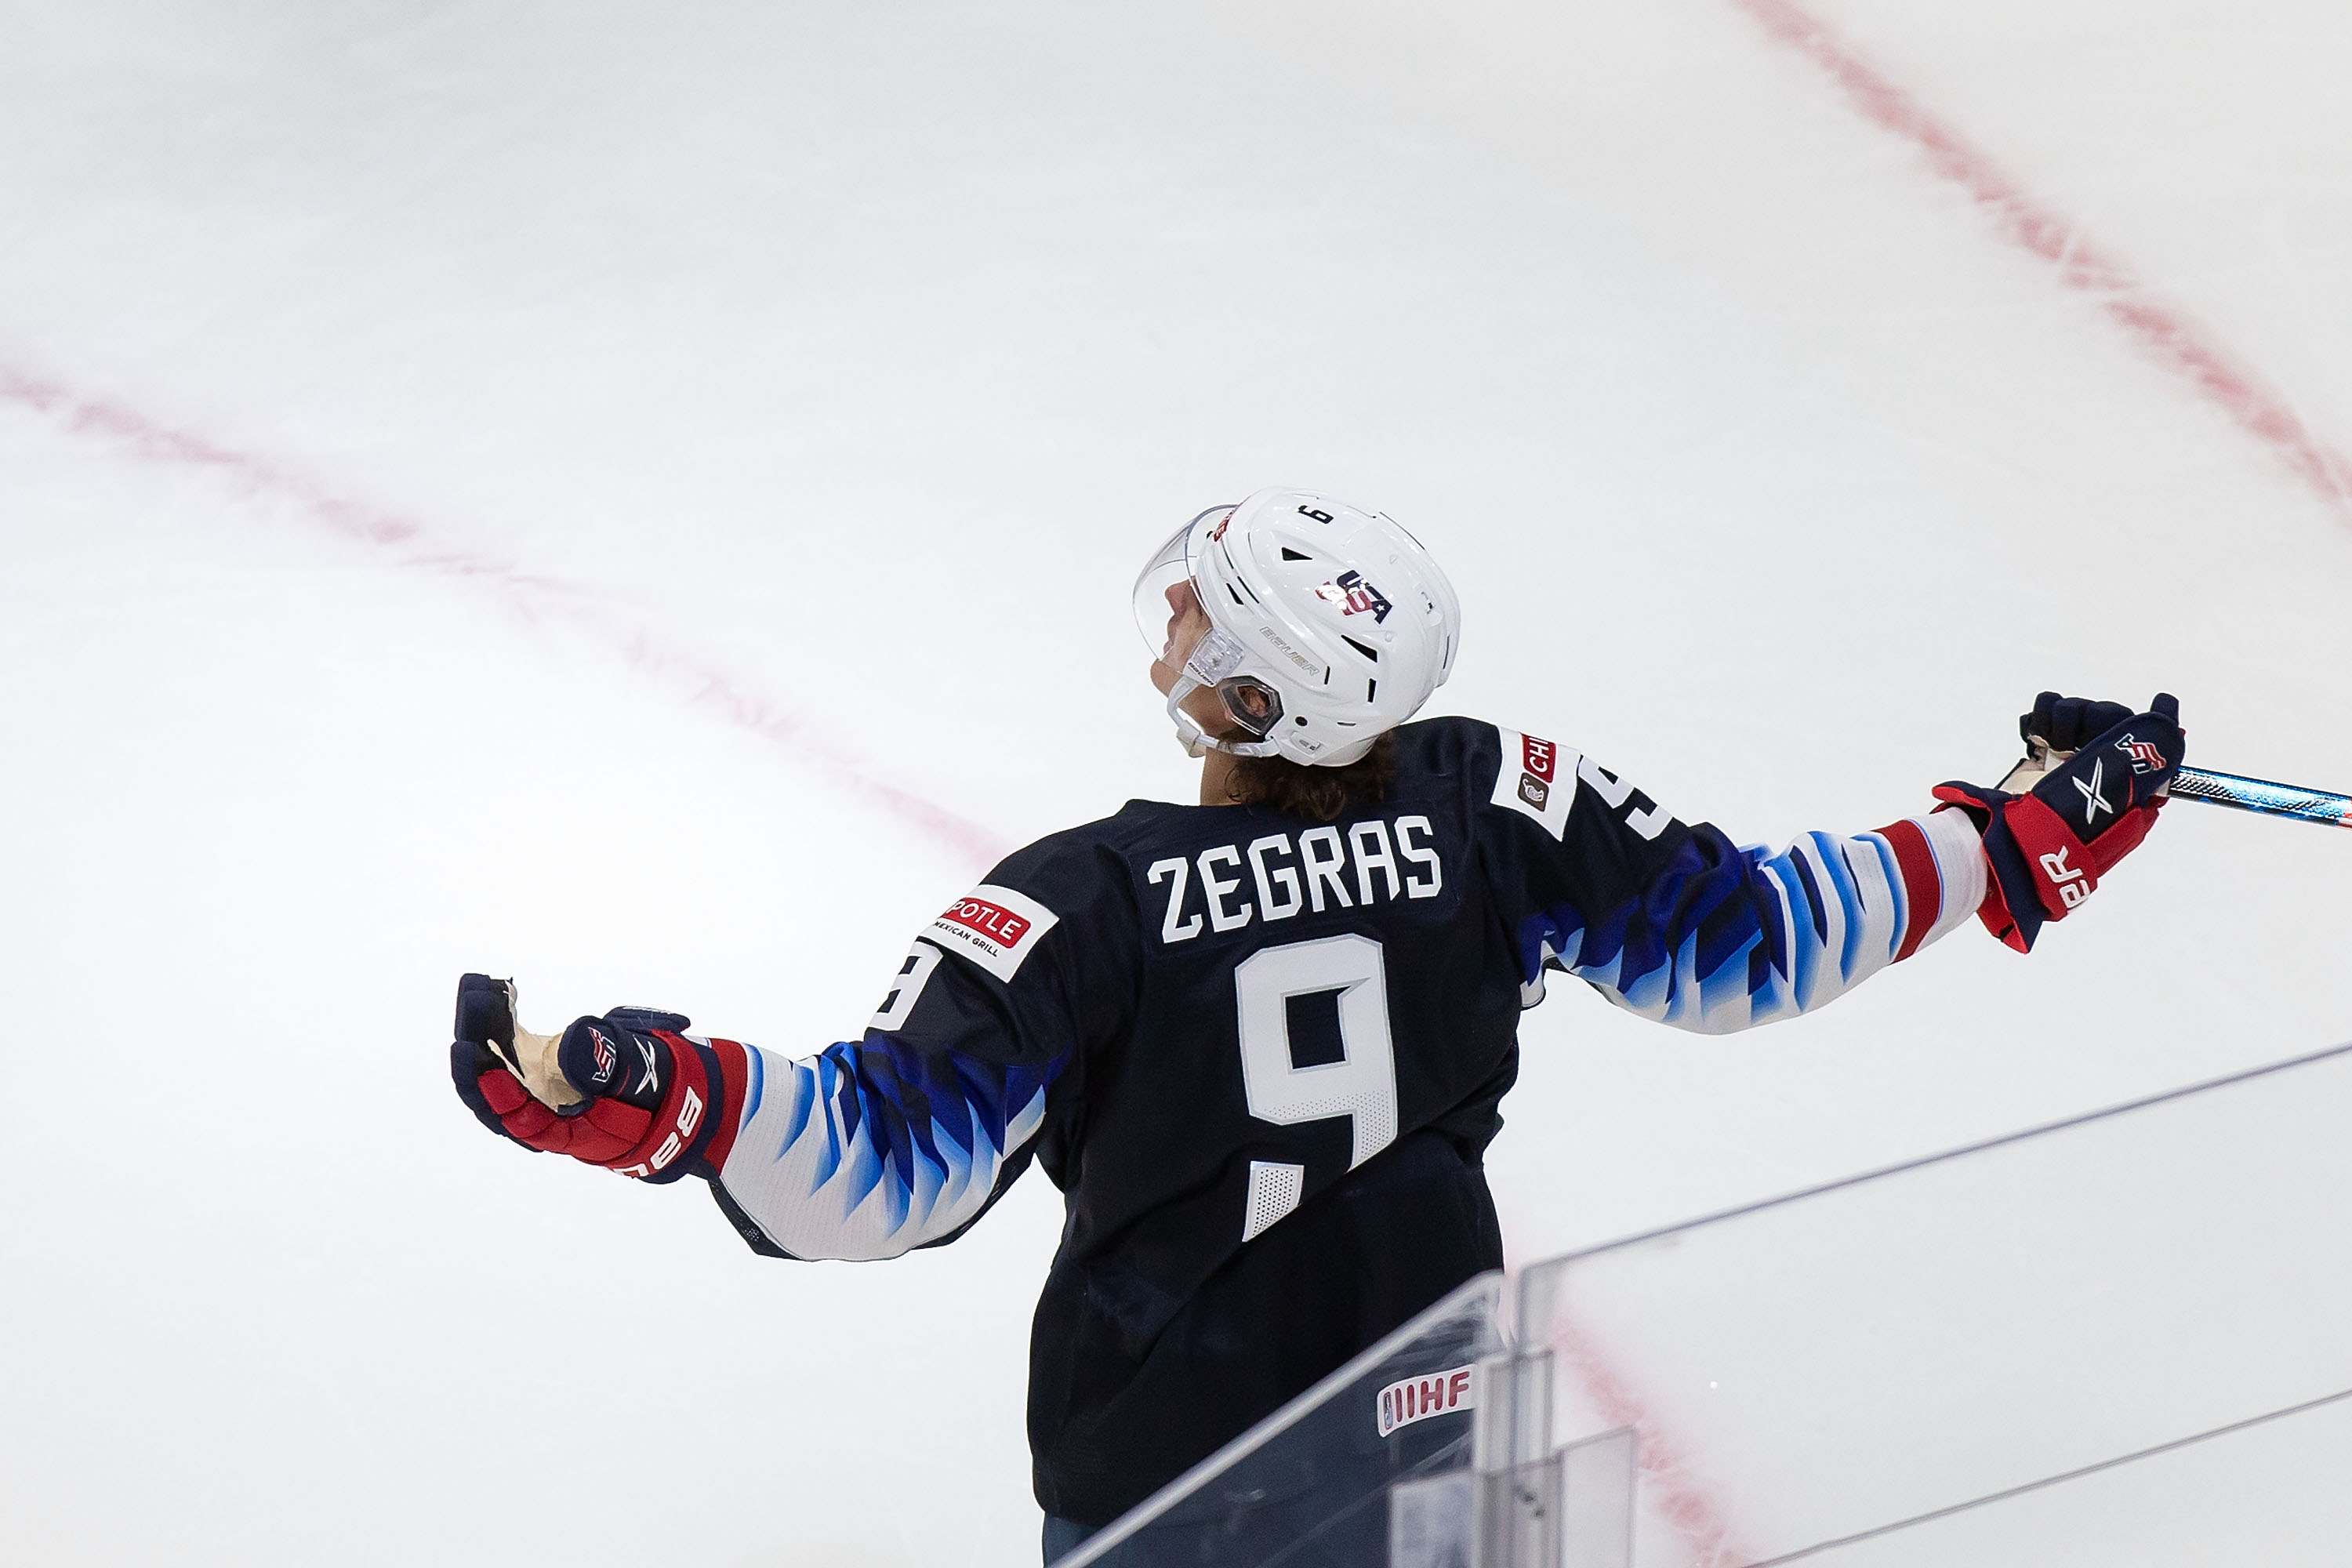 Trevor Zegras #9 of the United States celebrates a goal against the Czech Republic during the 2021 IIHF World Junior Championship at Rogers Place on December 29, 2020 in Edmonton, Canada.